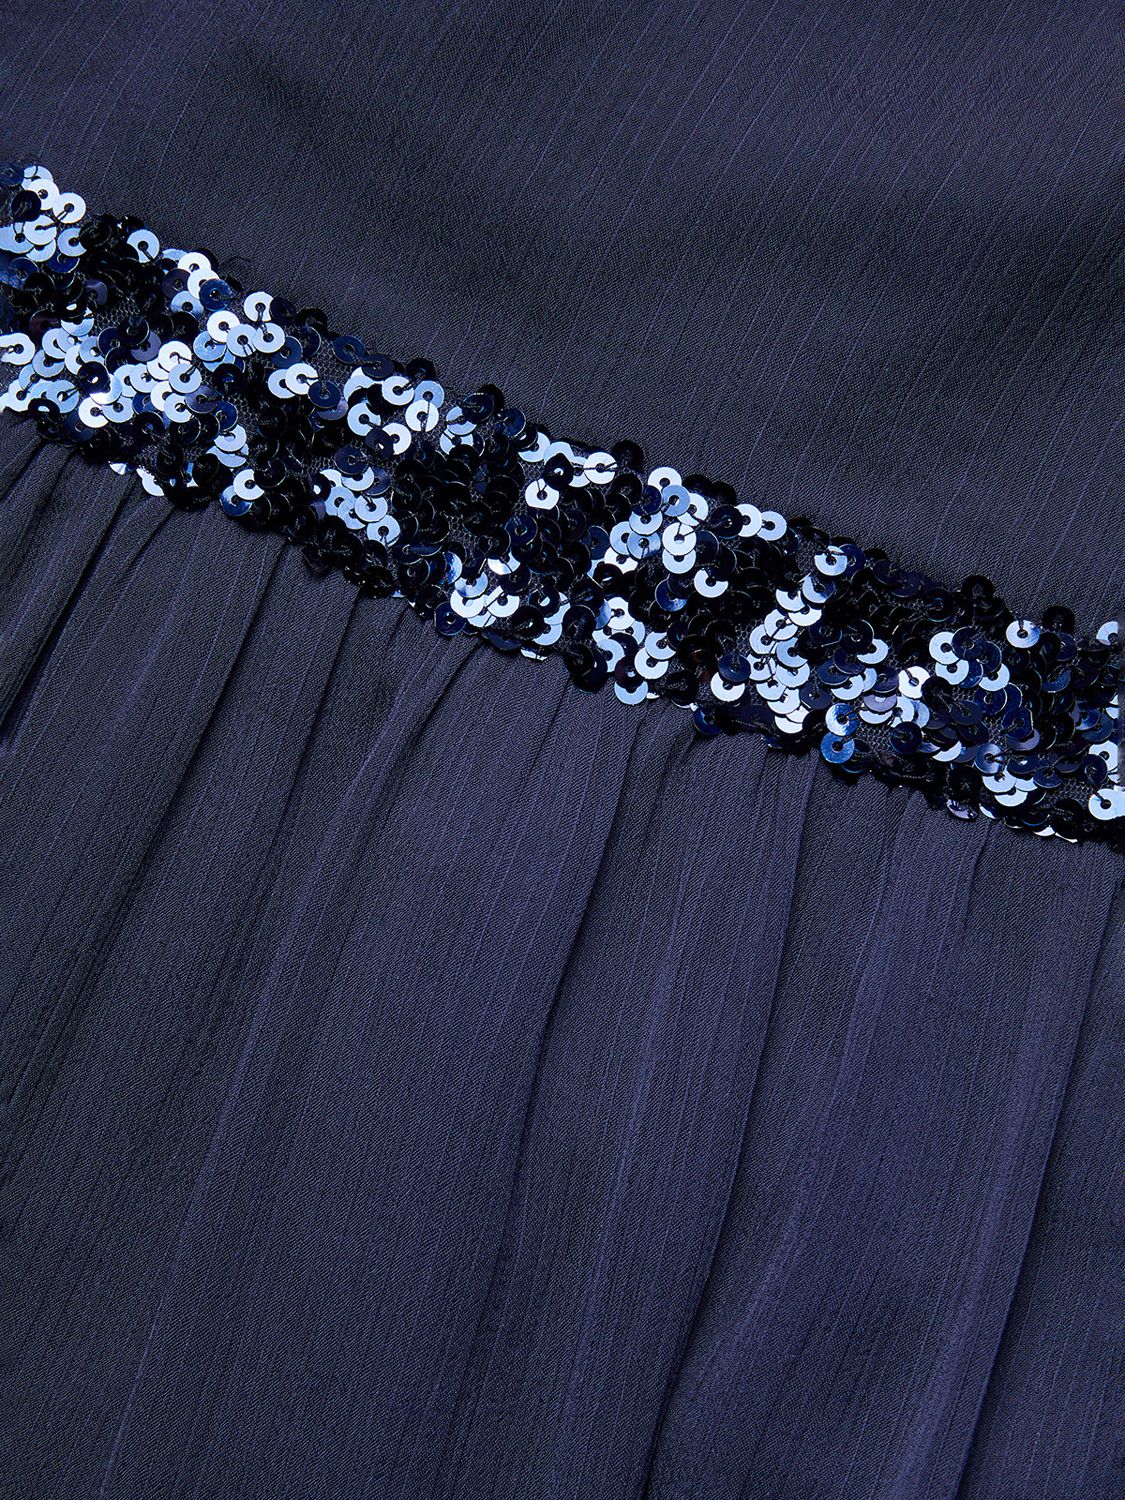 Buy Monsoon Kids' Ruby Ruffle Tiered Prom Dress, Navy Online at johnlewis.com